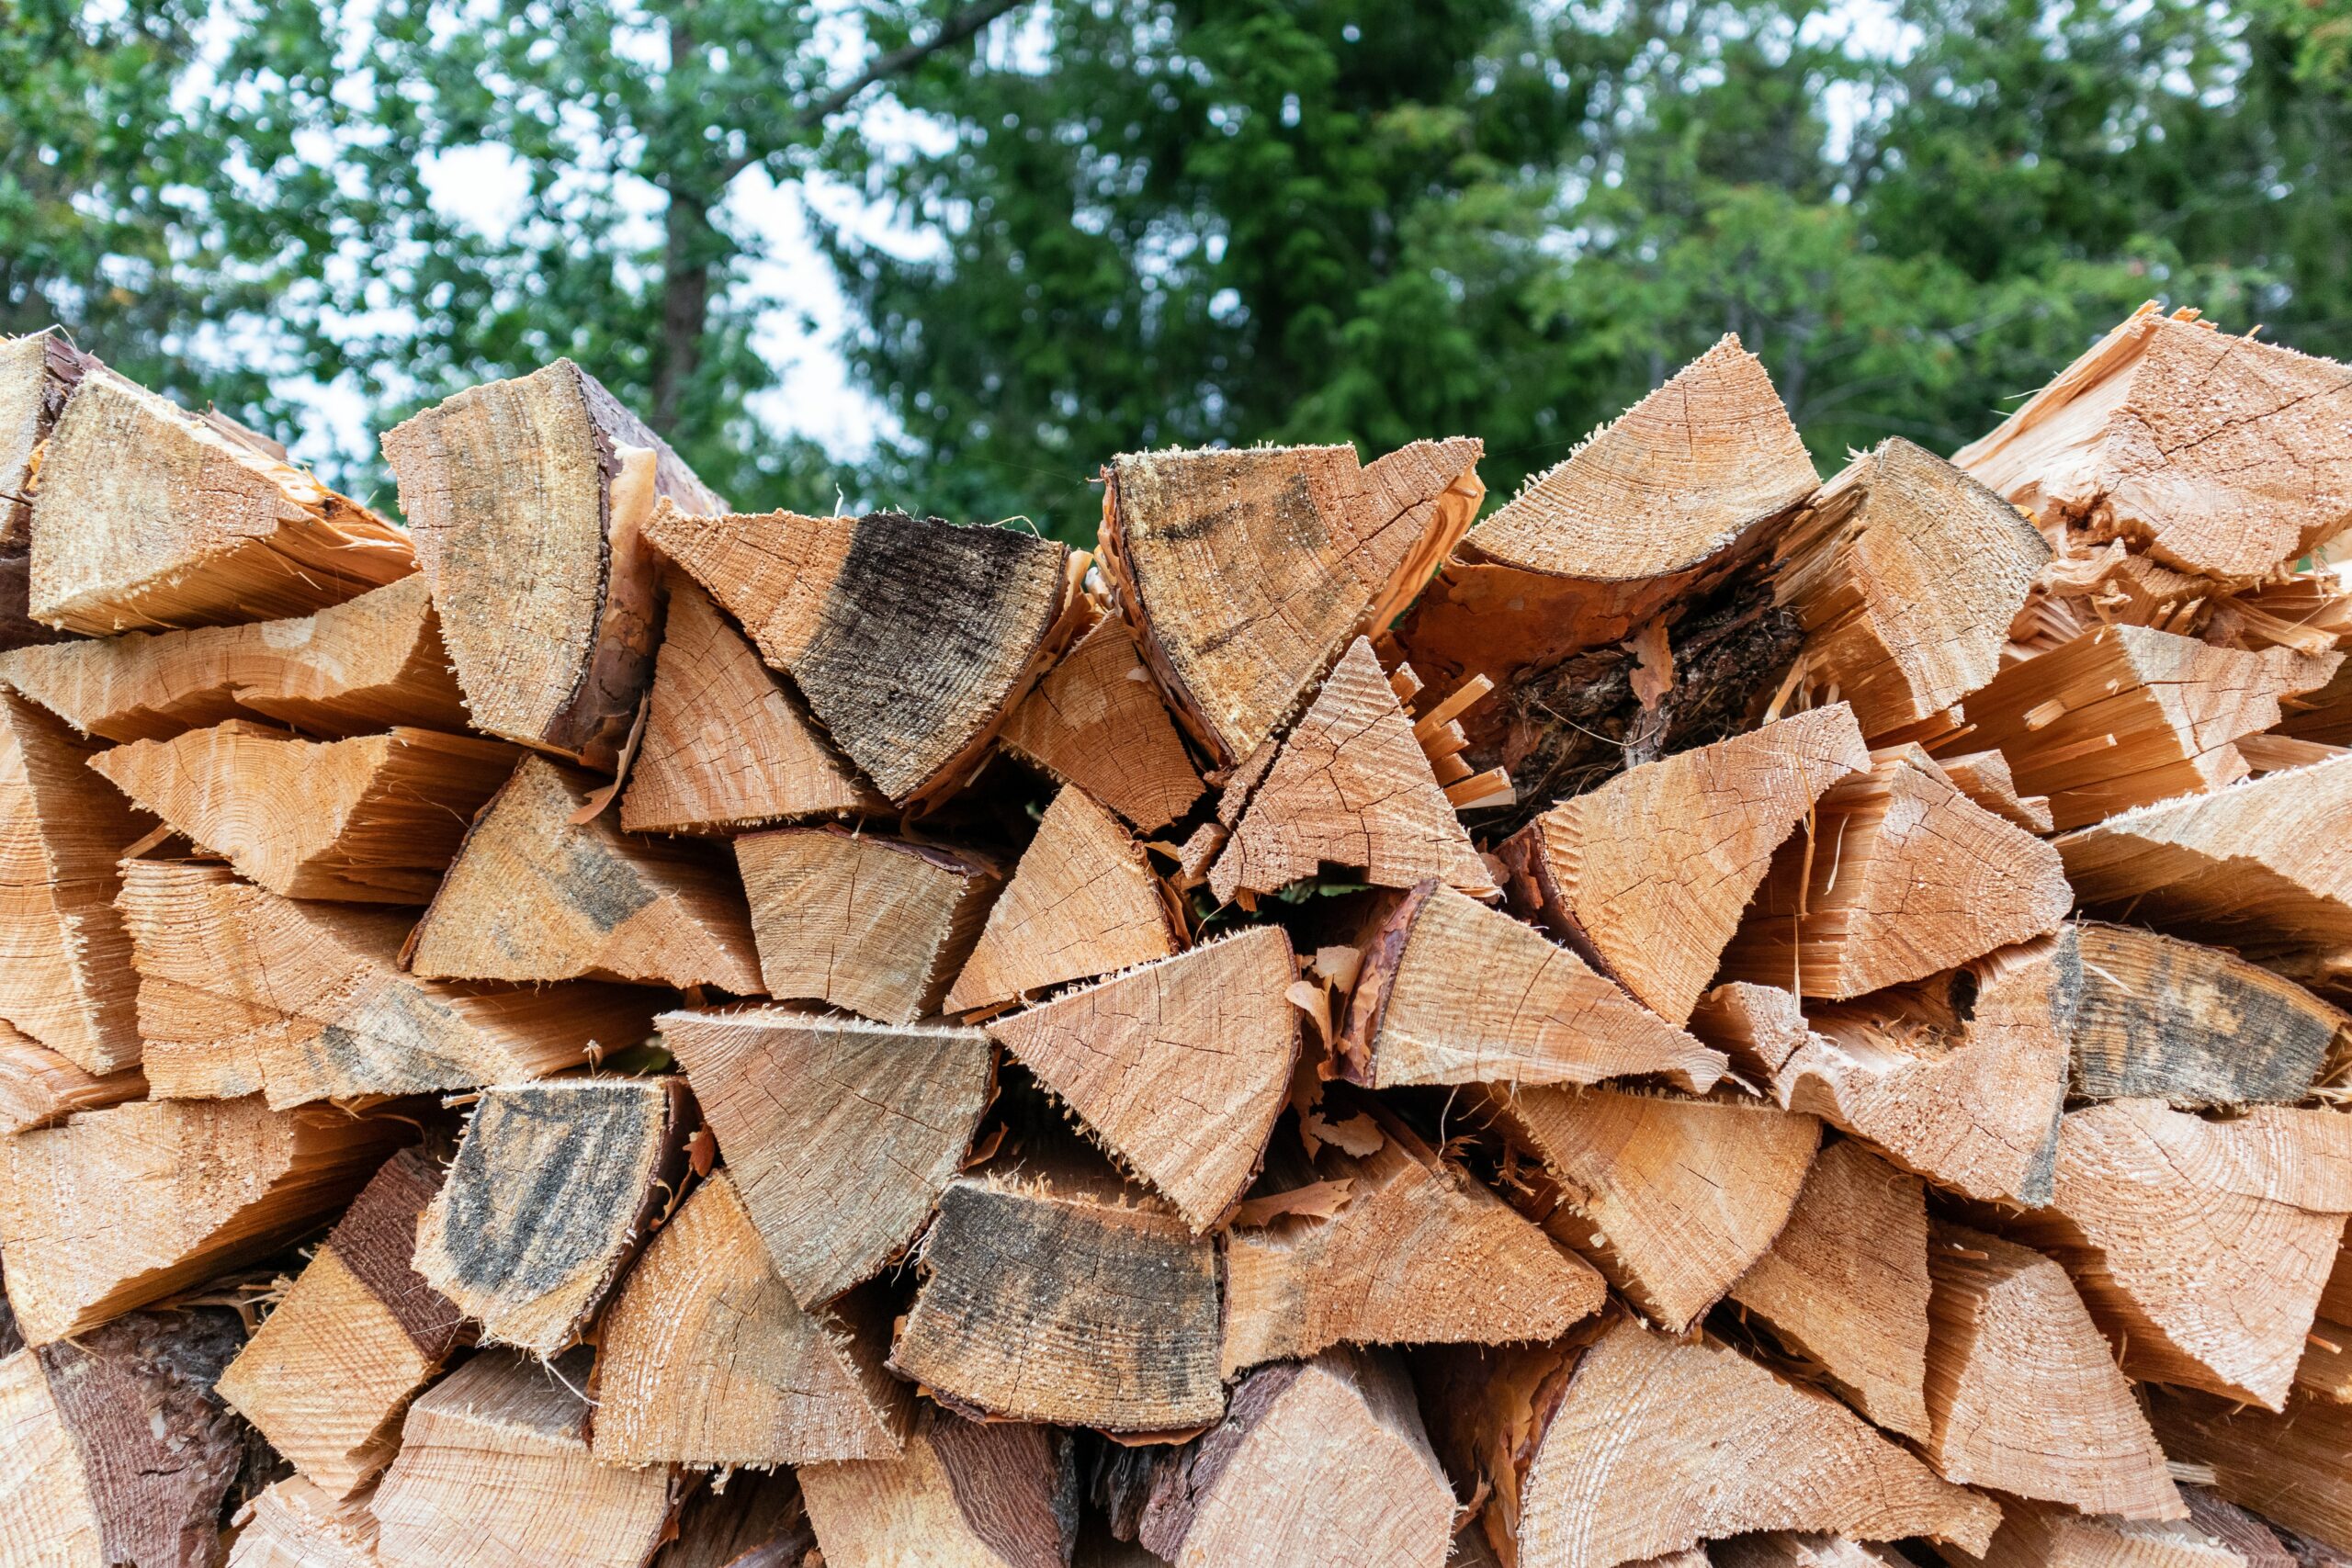 Using dry, seasoned wood will improve the efficiency of your fireplace